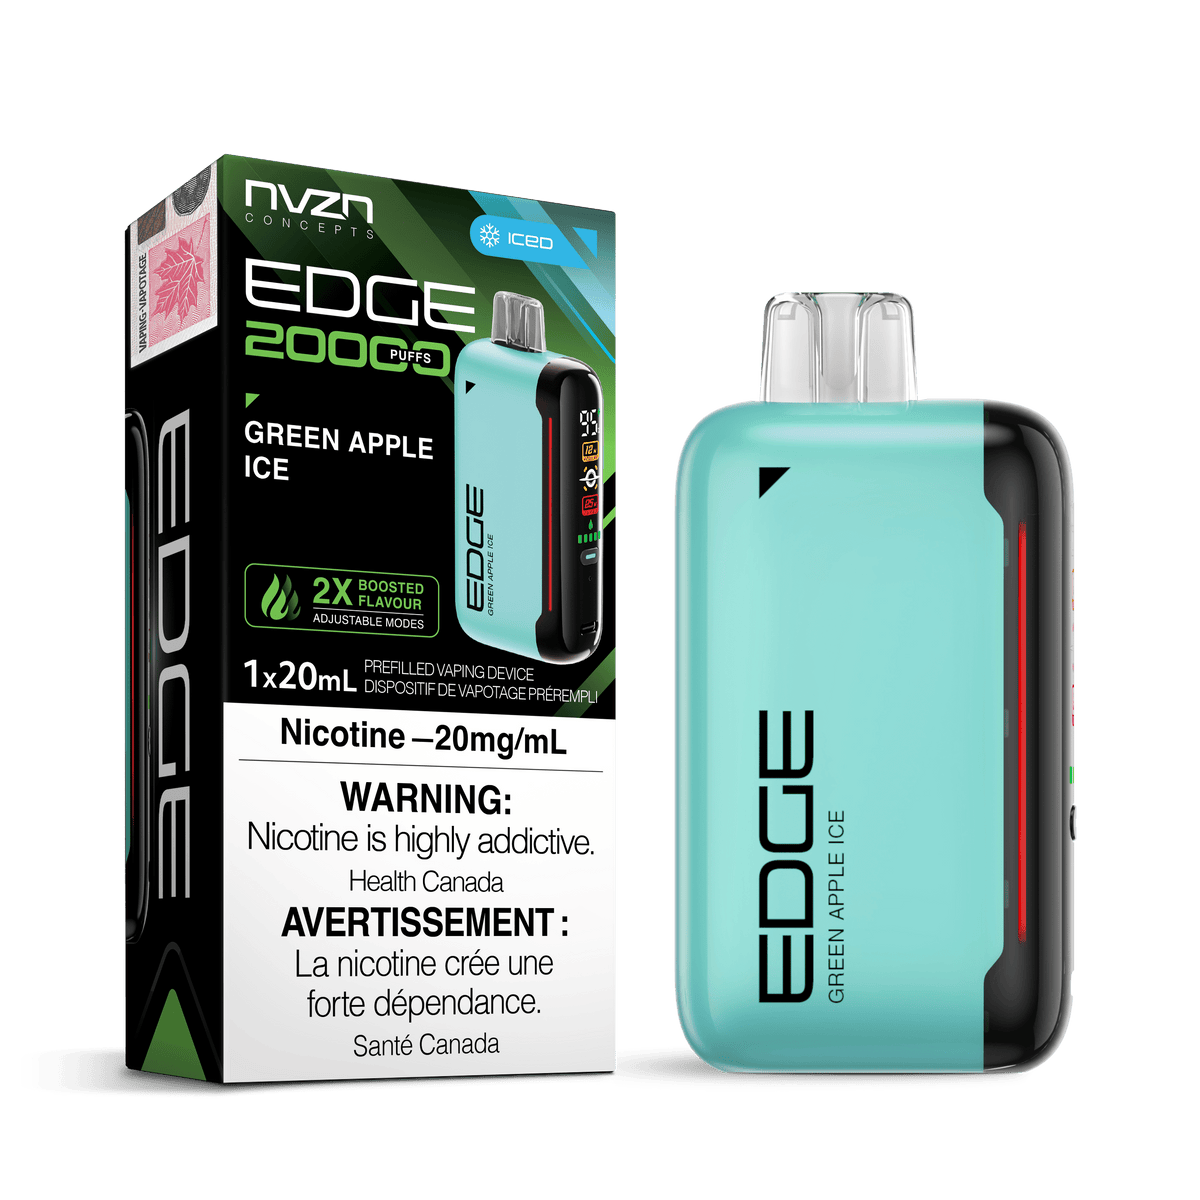 Edge By NVZN - Green Apple Ice Disposable Vape available on Canada online vape shop